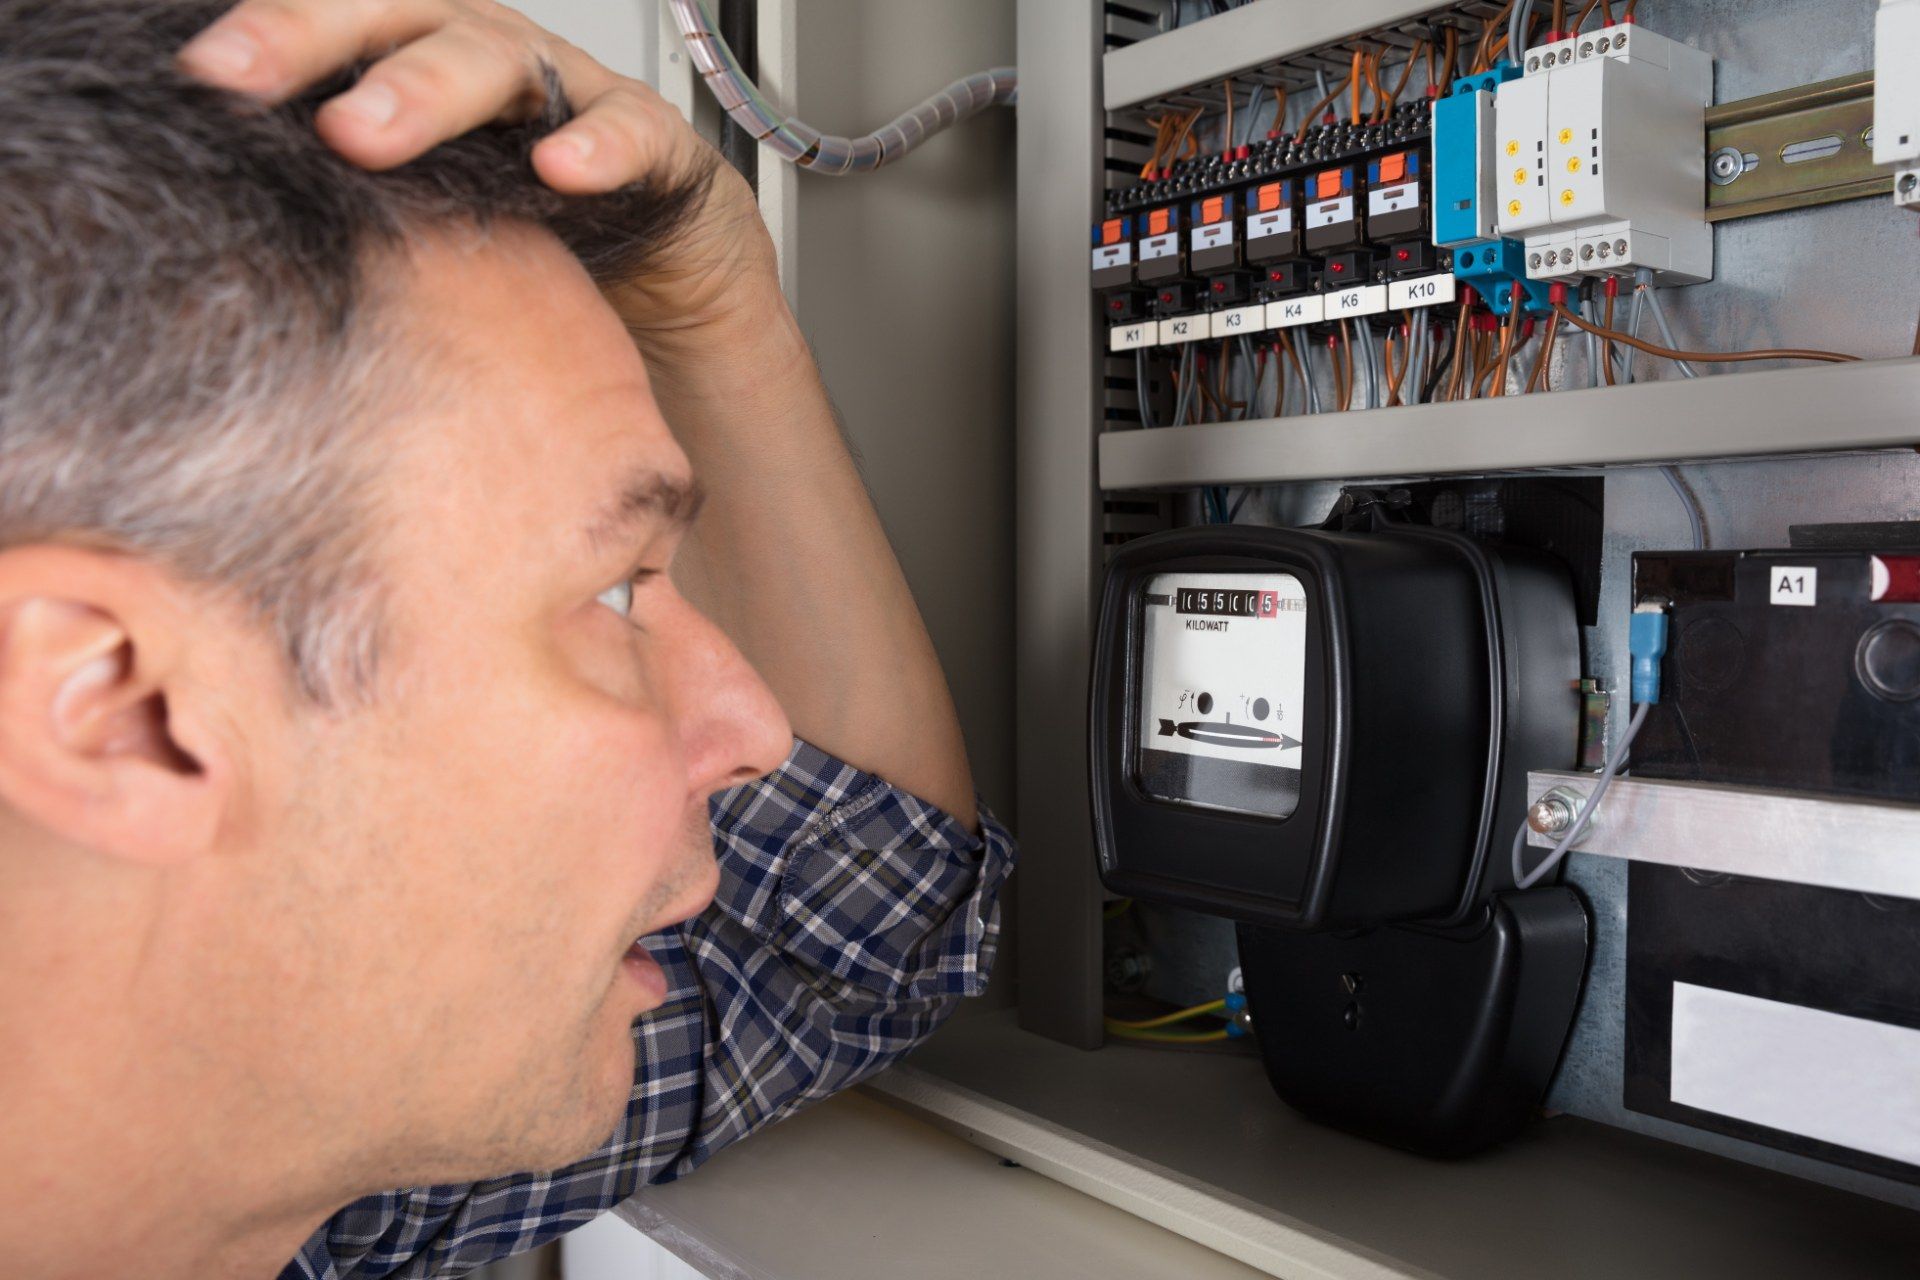 Man looks astonished while looking at electricity meter - British Gas